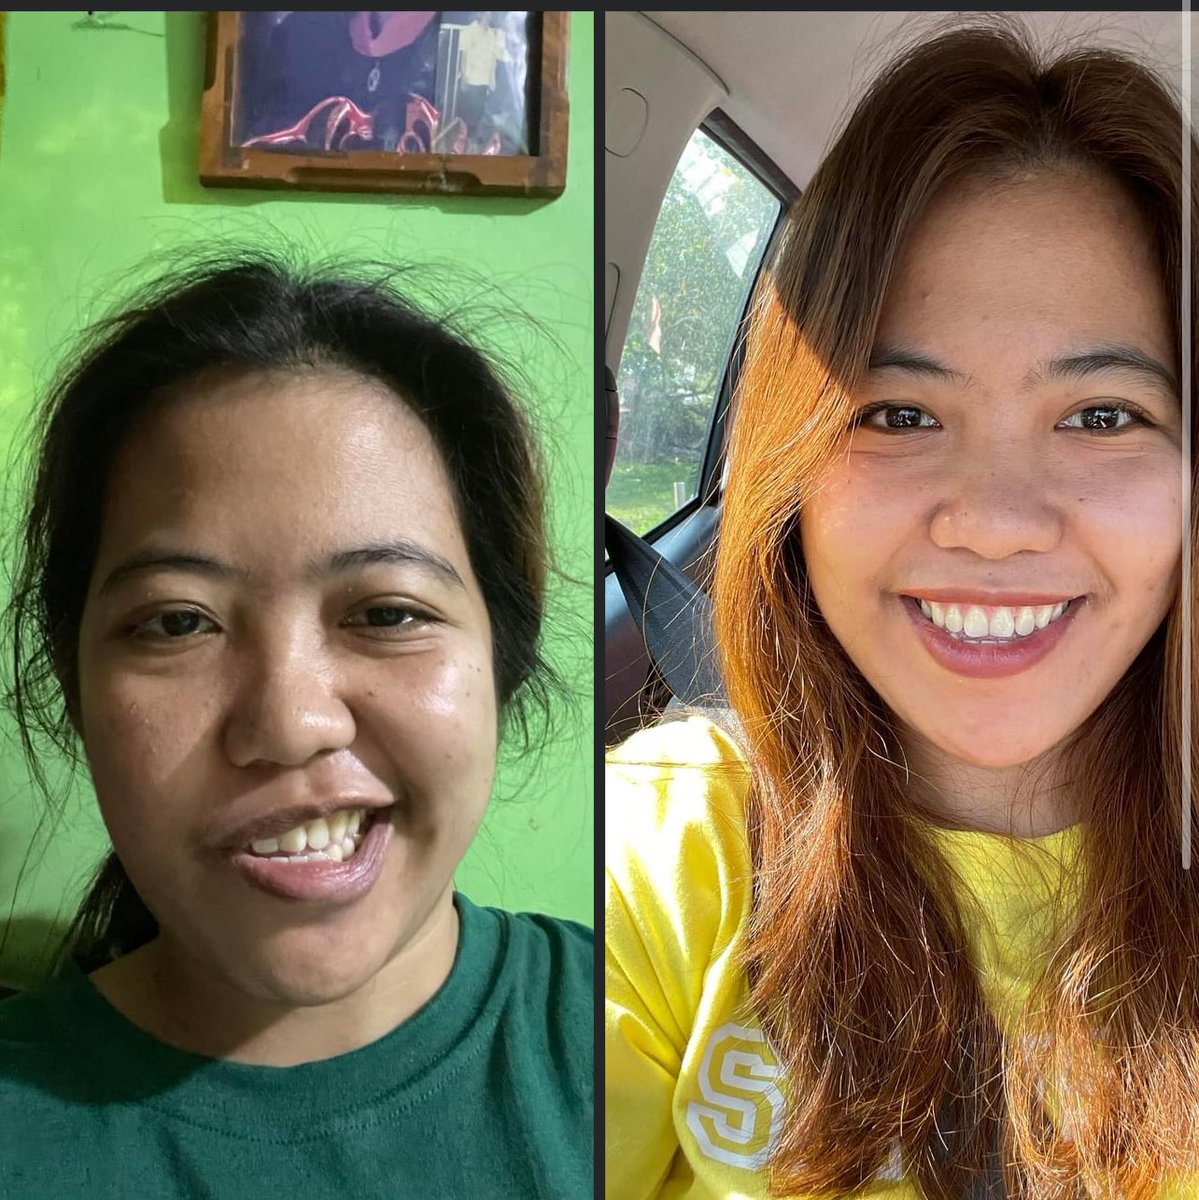 drop selca or bad april 🐥🩷
Left side was taken 3 months ago, facial paralysis after operations due to ear infection. 
Thank God for healing and His provision. 
#exol #labanlangsabuhay #roadtorecovery